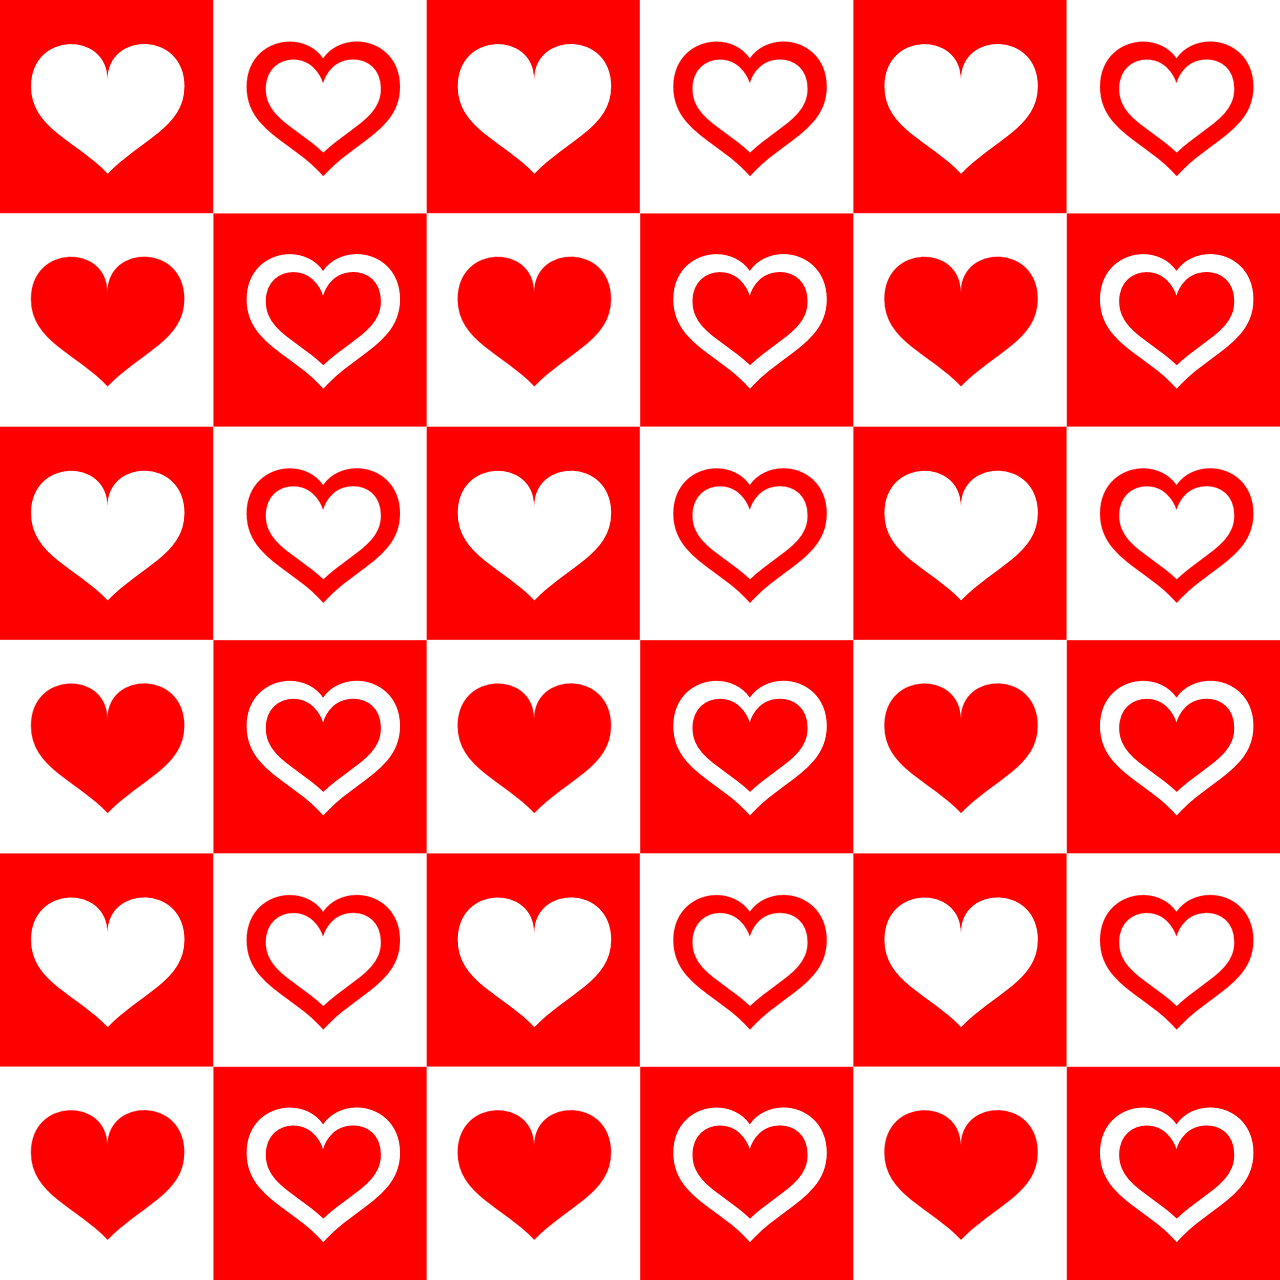 hearts in a checkerboard pattern